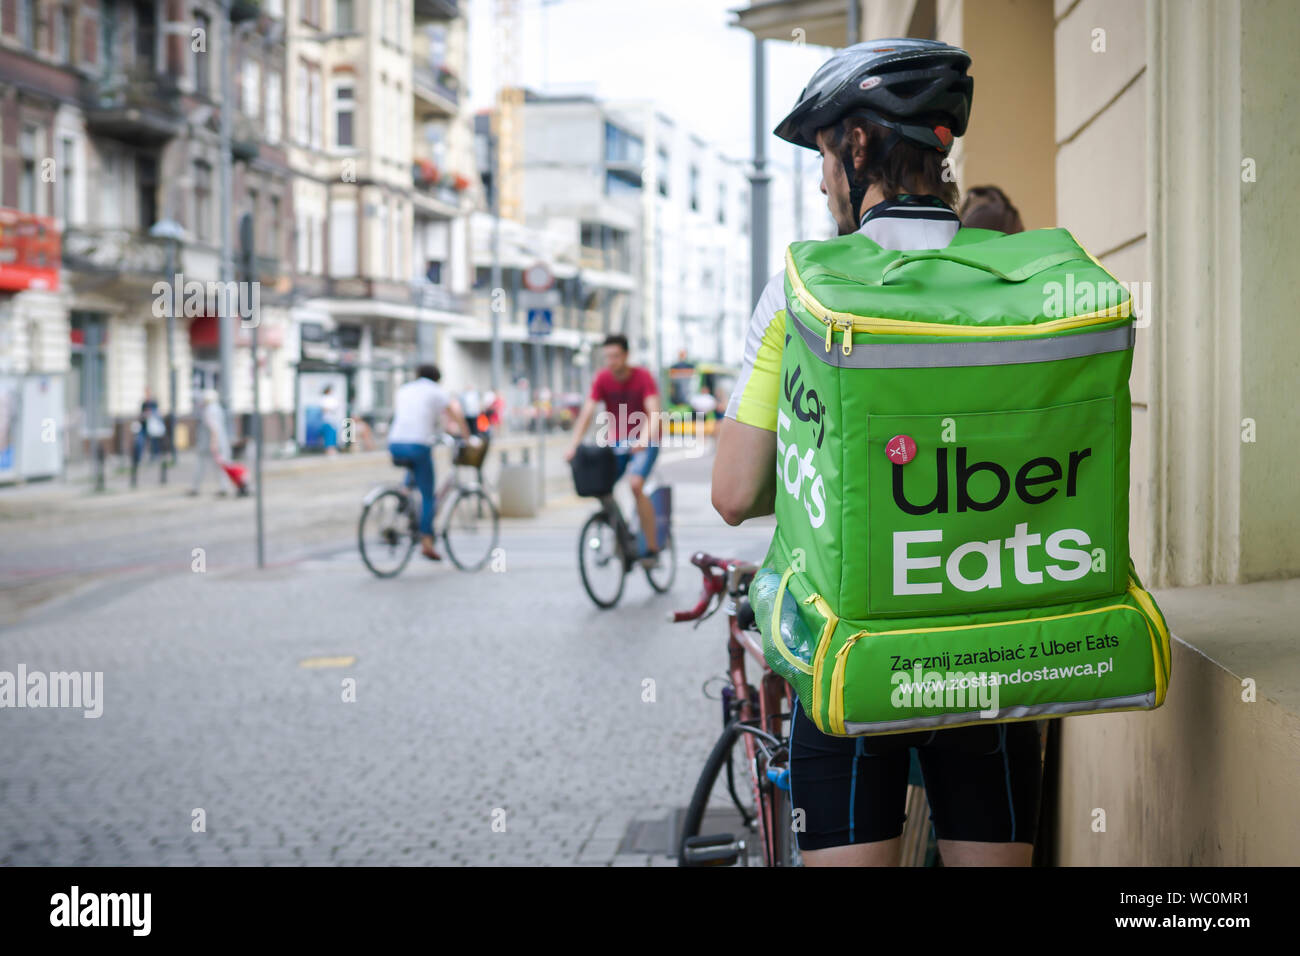 Uber Eats delivery service in town. Stock Photo